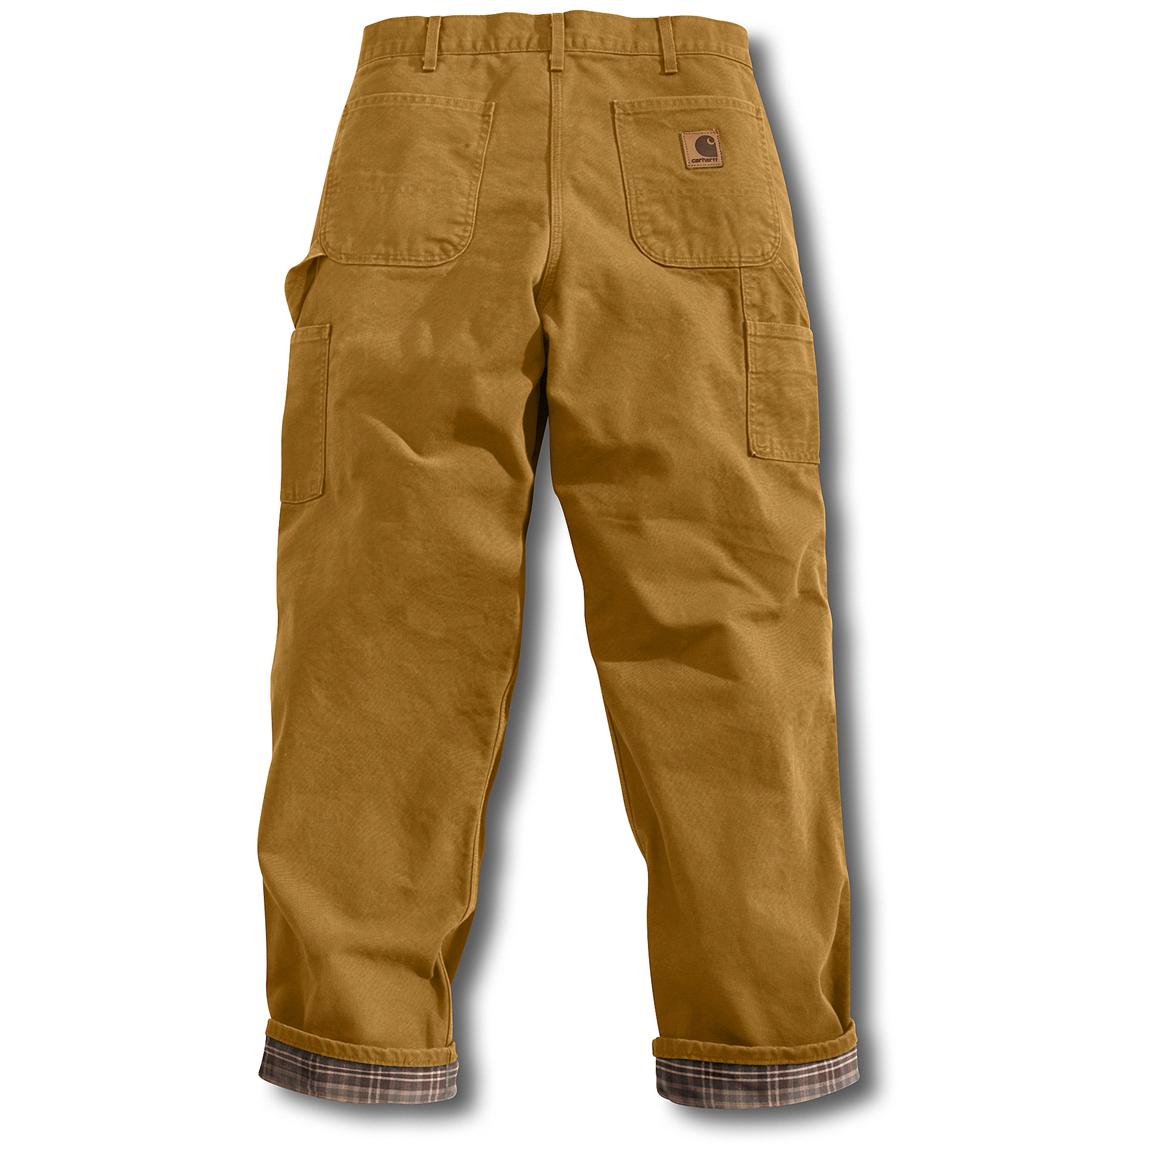 Carhartt Flannel Lined Duck Work Dungarees - 226802, Insulated Pants ...